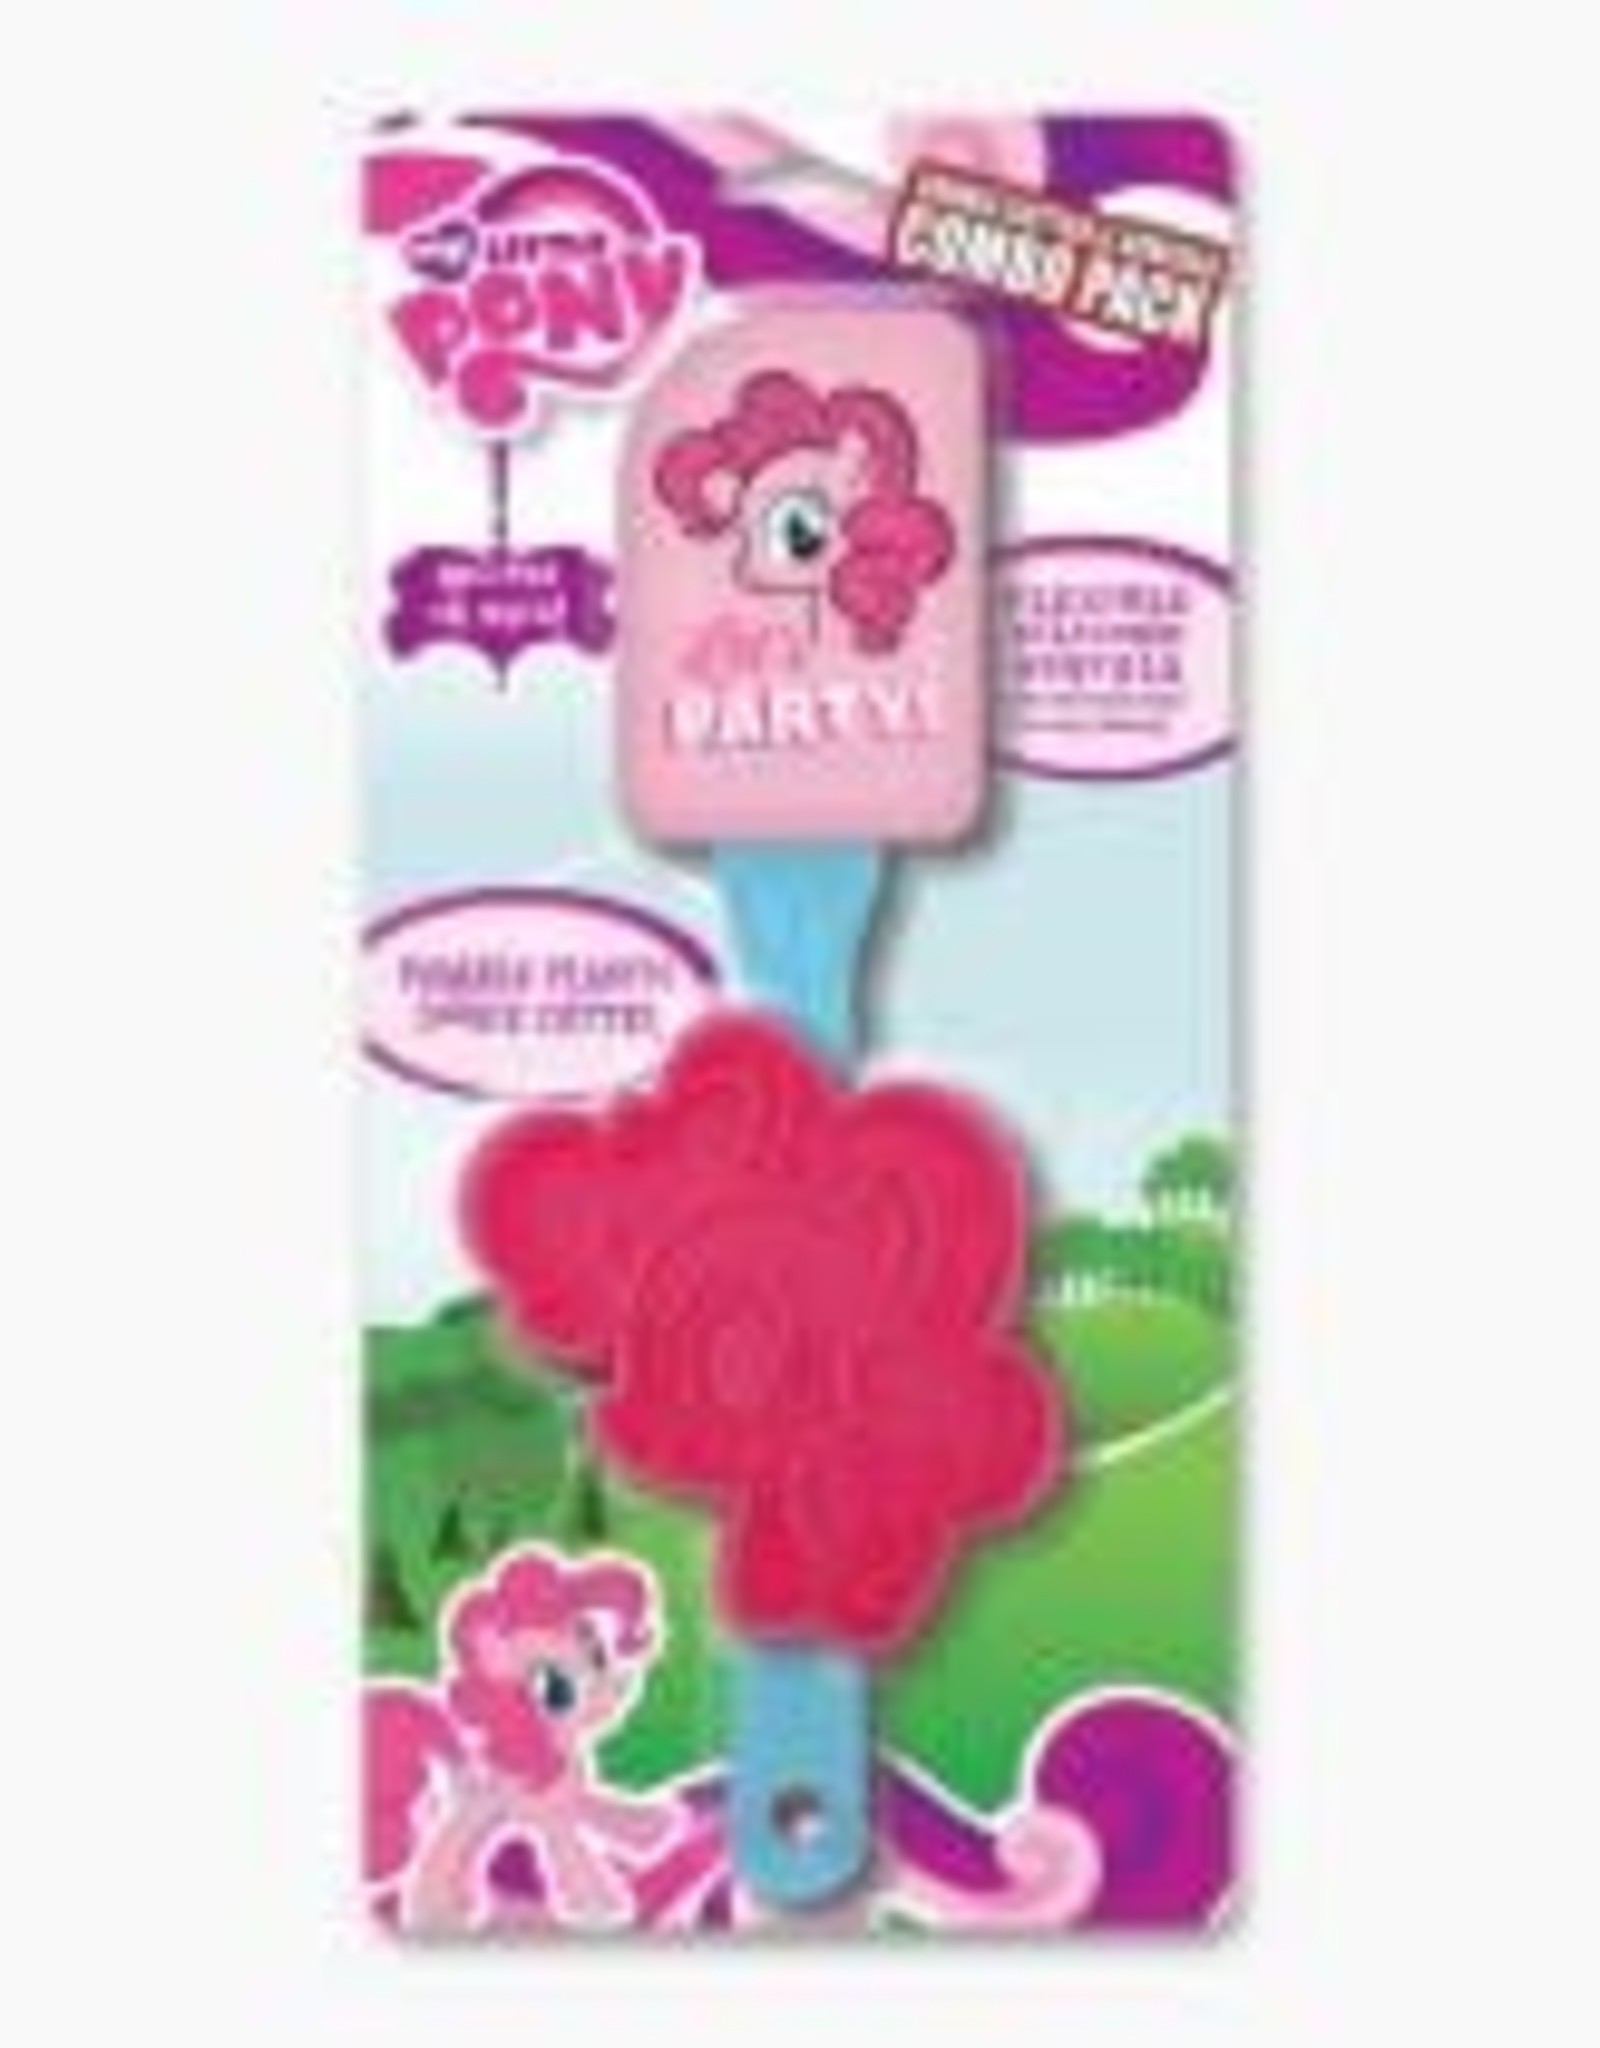 My Little Pony Cookie Cutter & Spatula Combo